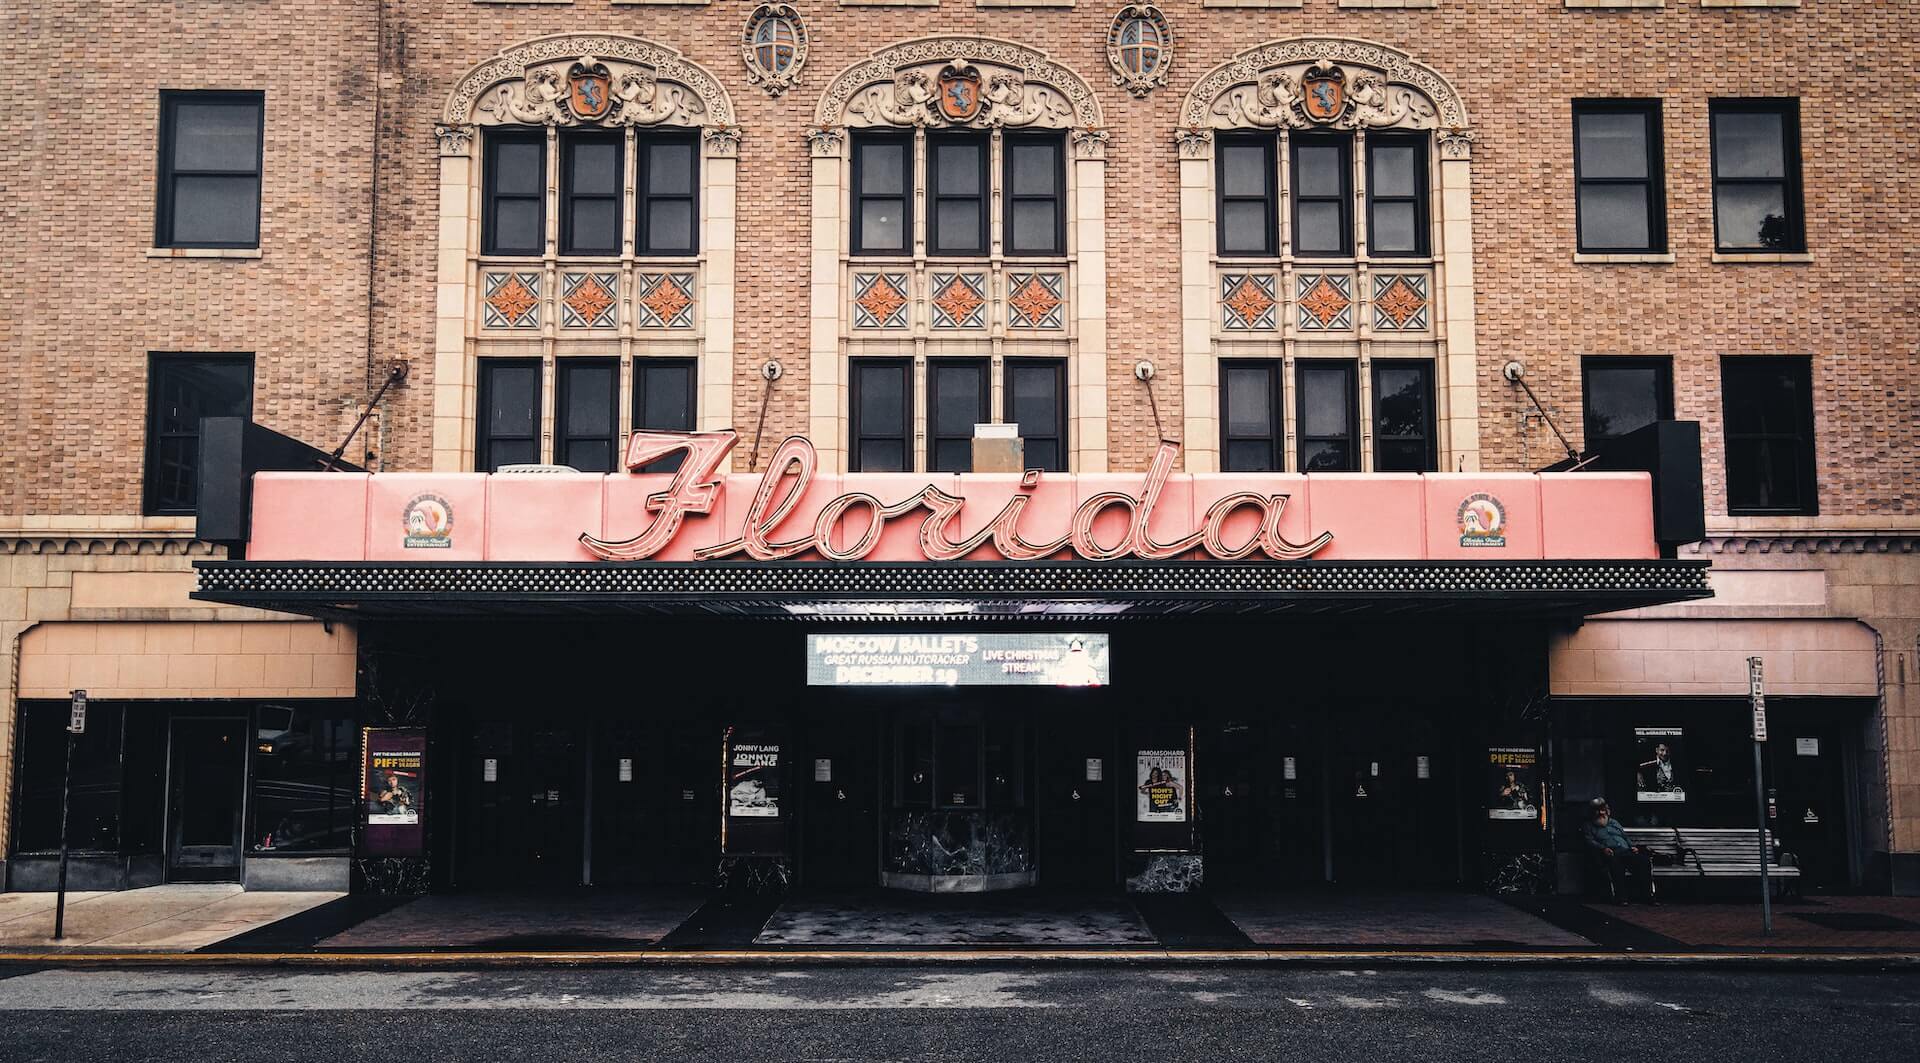 The Florida Theater in Jacksonville, Florida